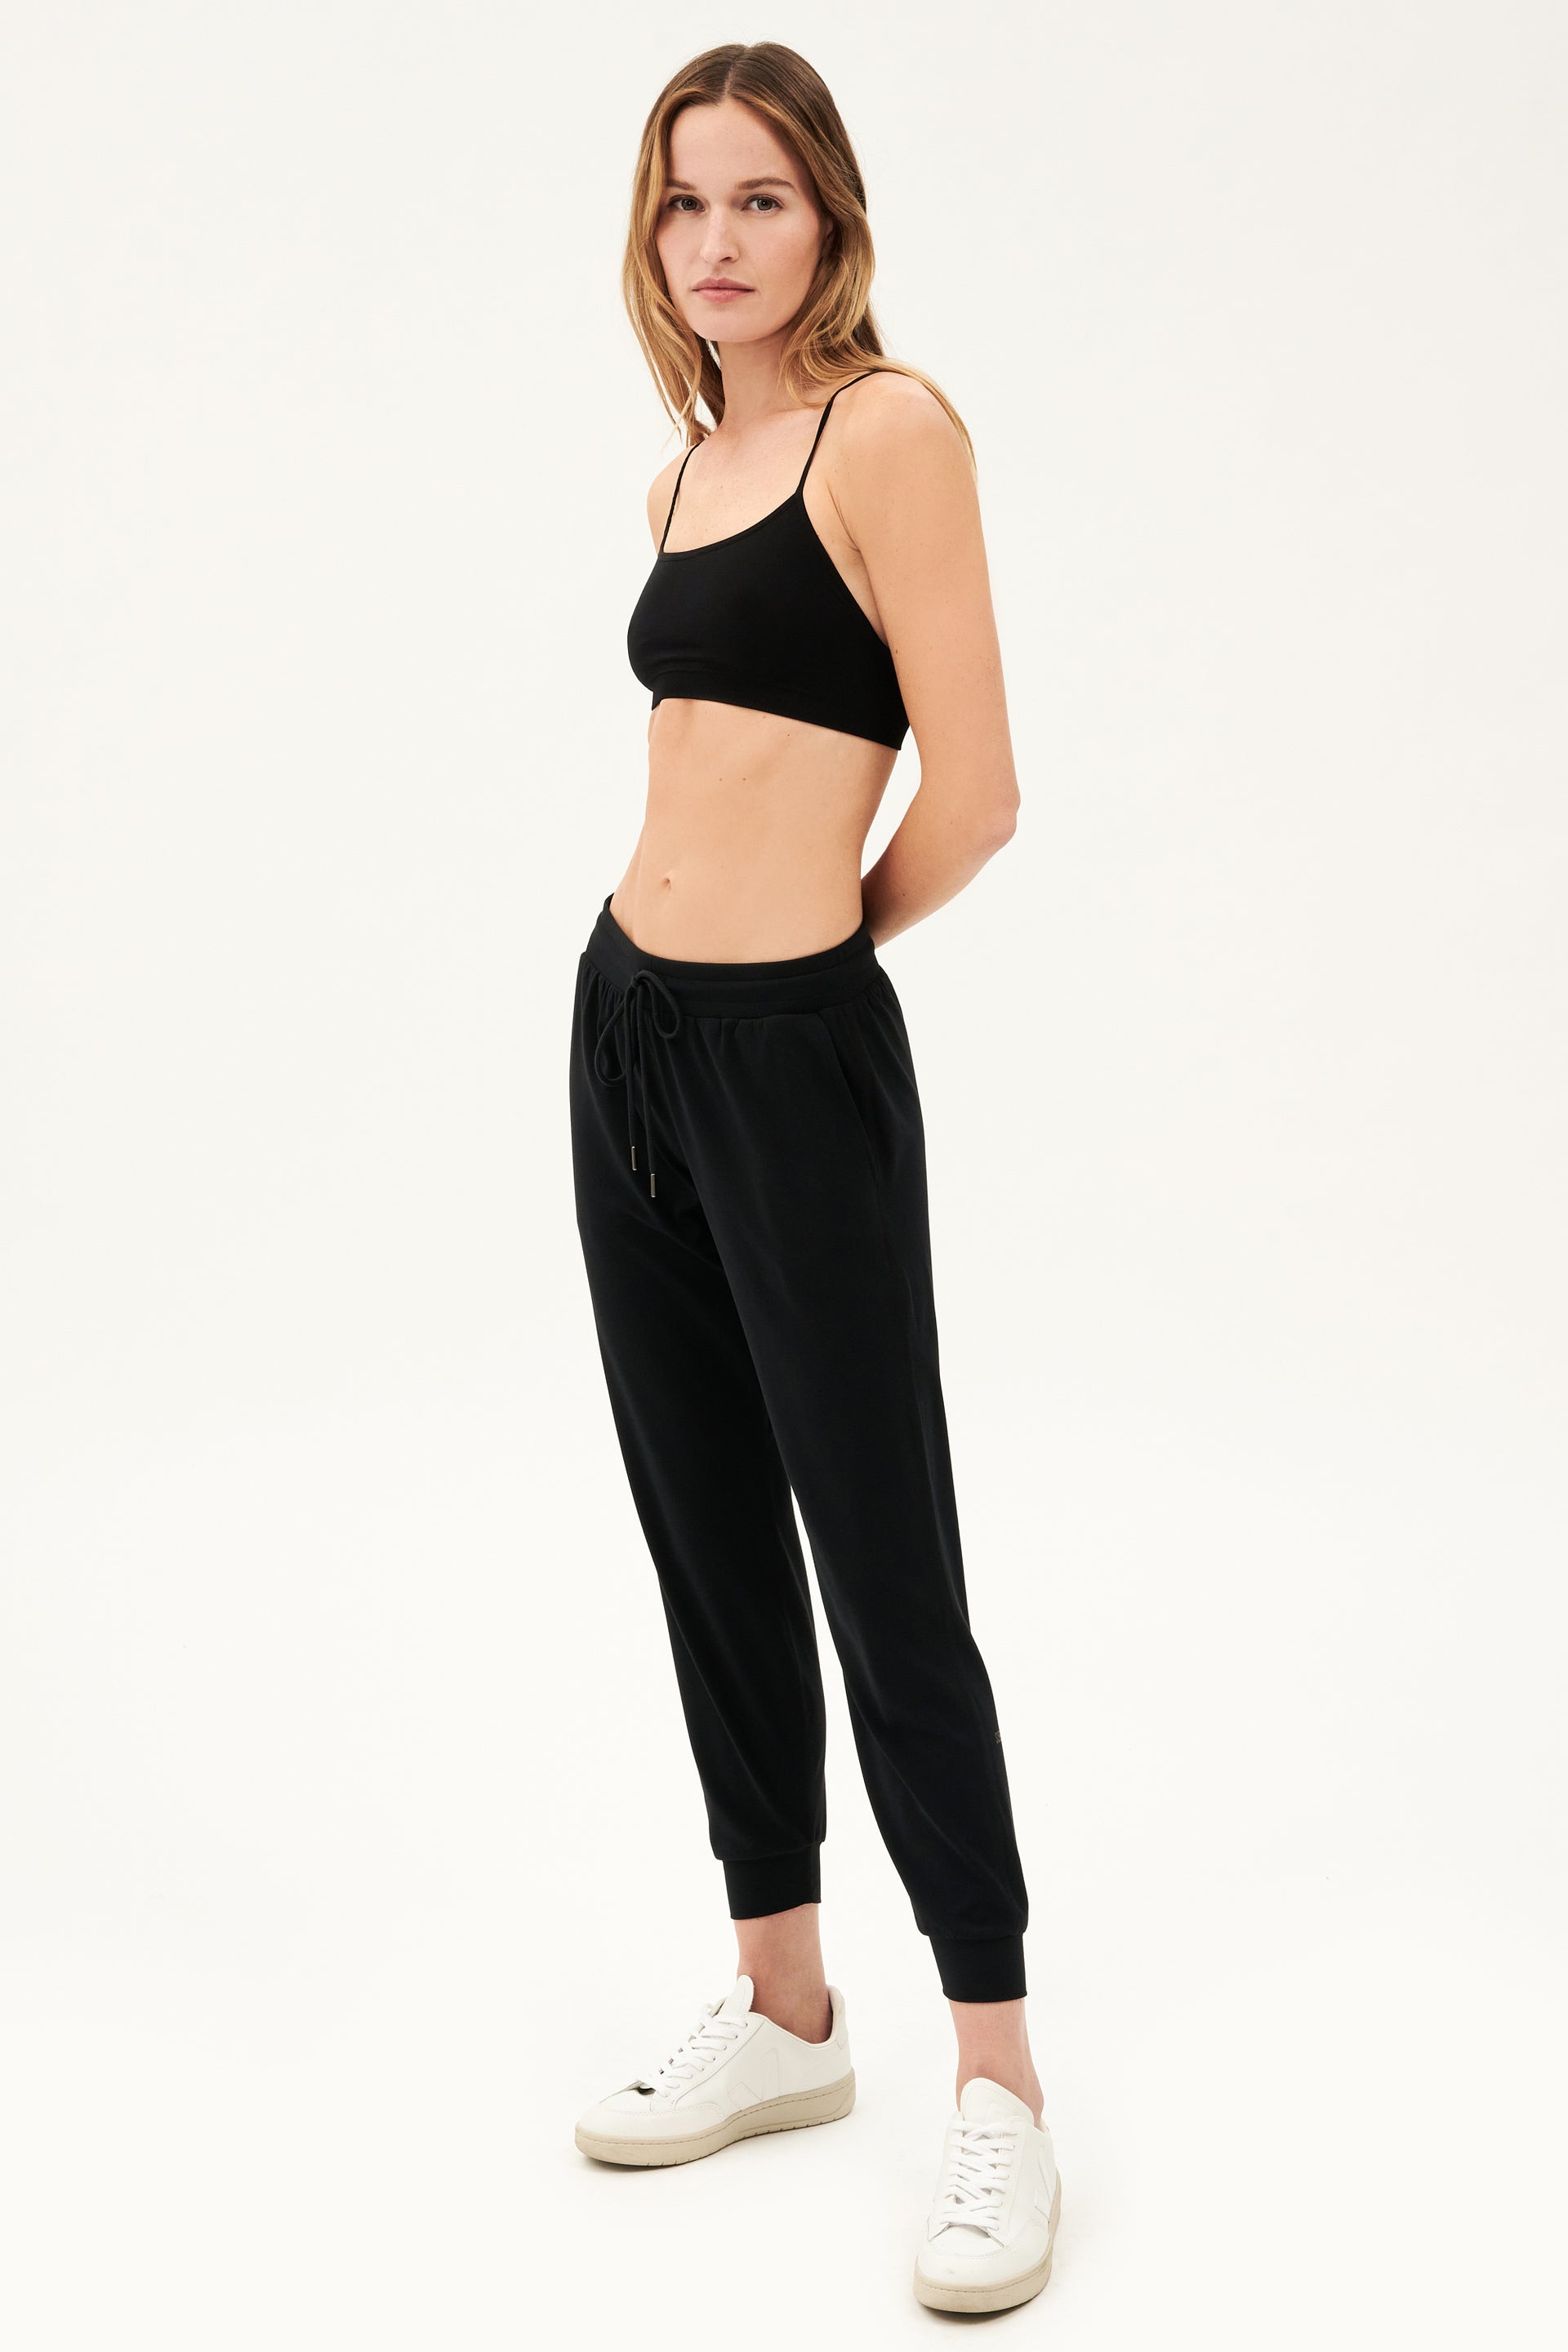 Airweight Jogger - Black